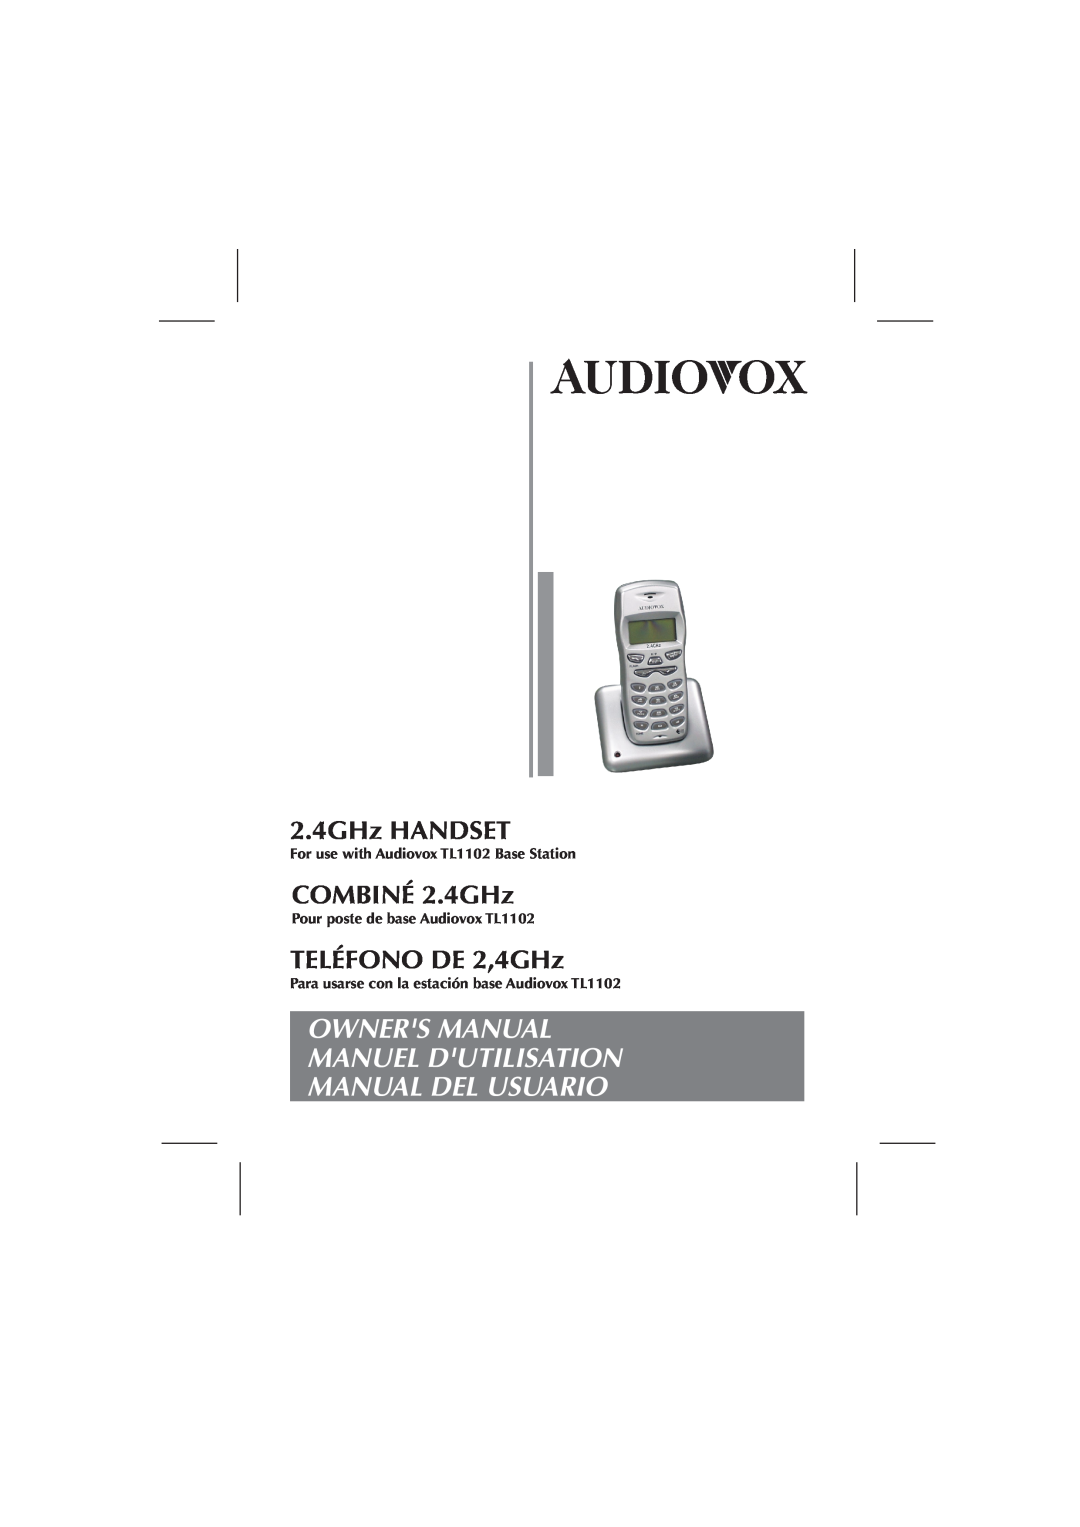 Audiovox owner manual For use with Audiovox TL1102 Base Station, Pour poste de base Audiovox TL1102, 2.4GHz HANDSET 